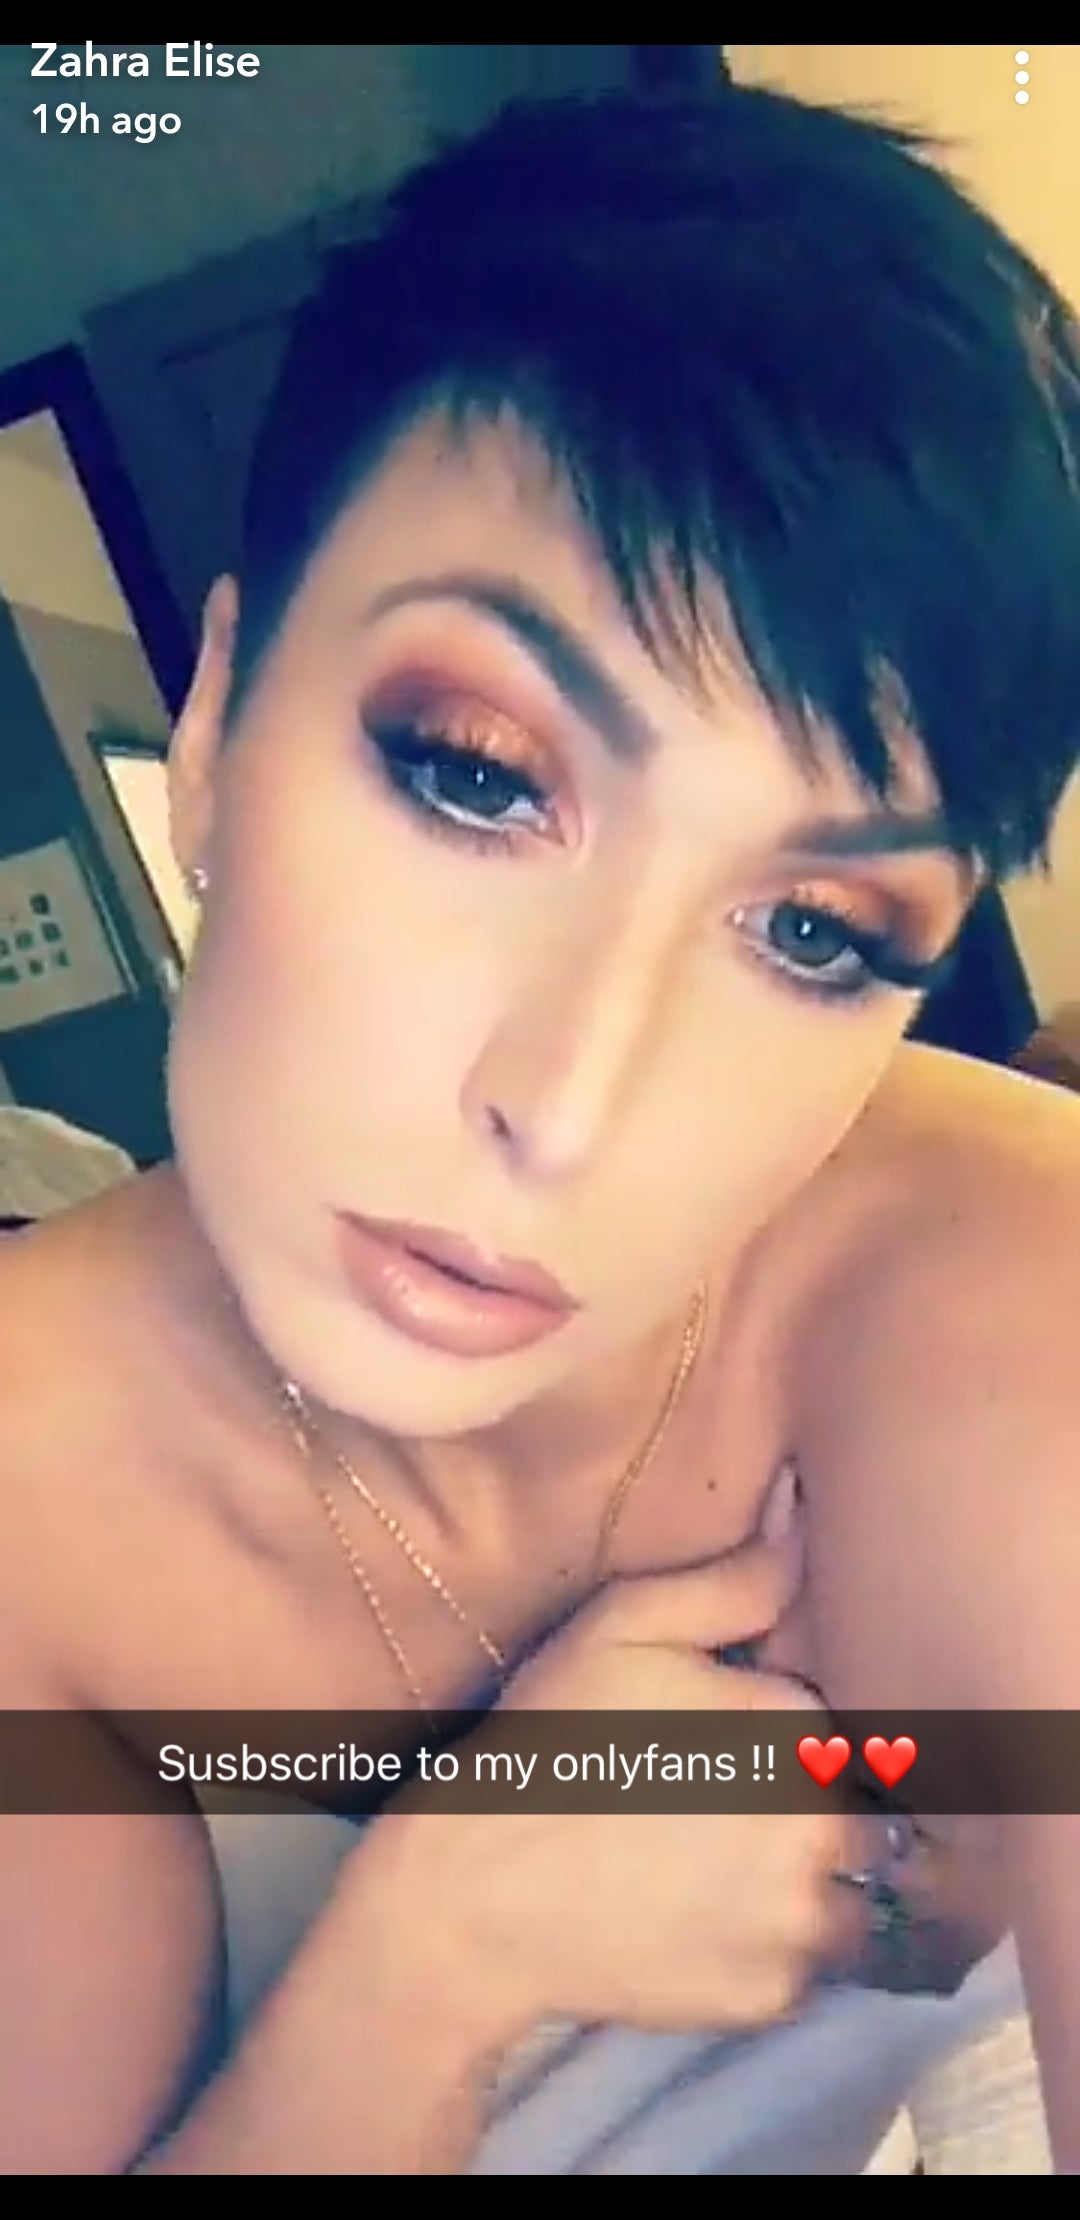 Nip slip from snap chat